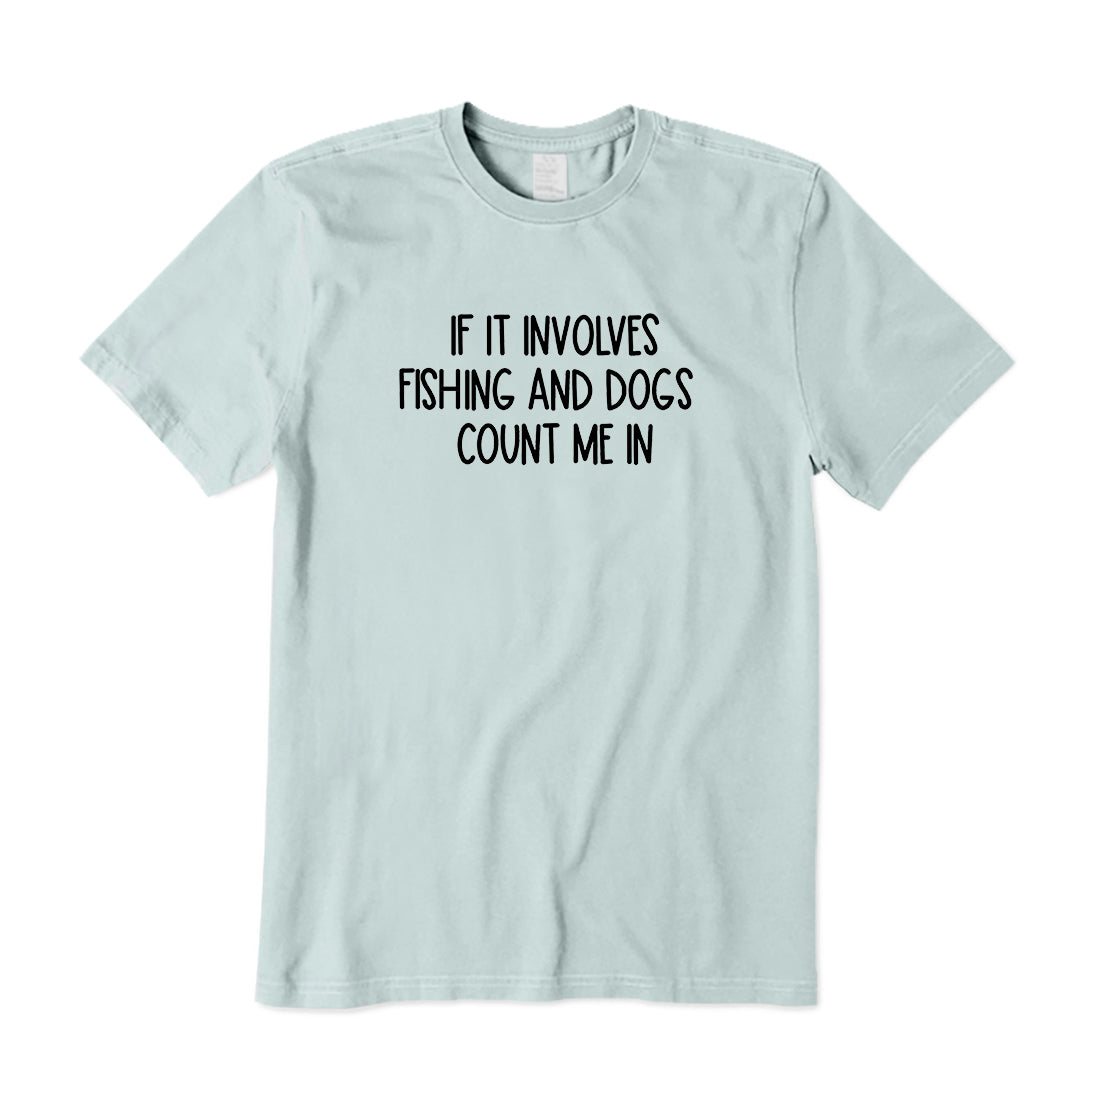 If it involves fishing and dogs count me in T-Shirt